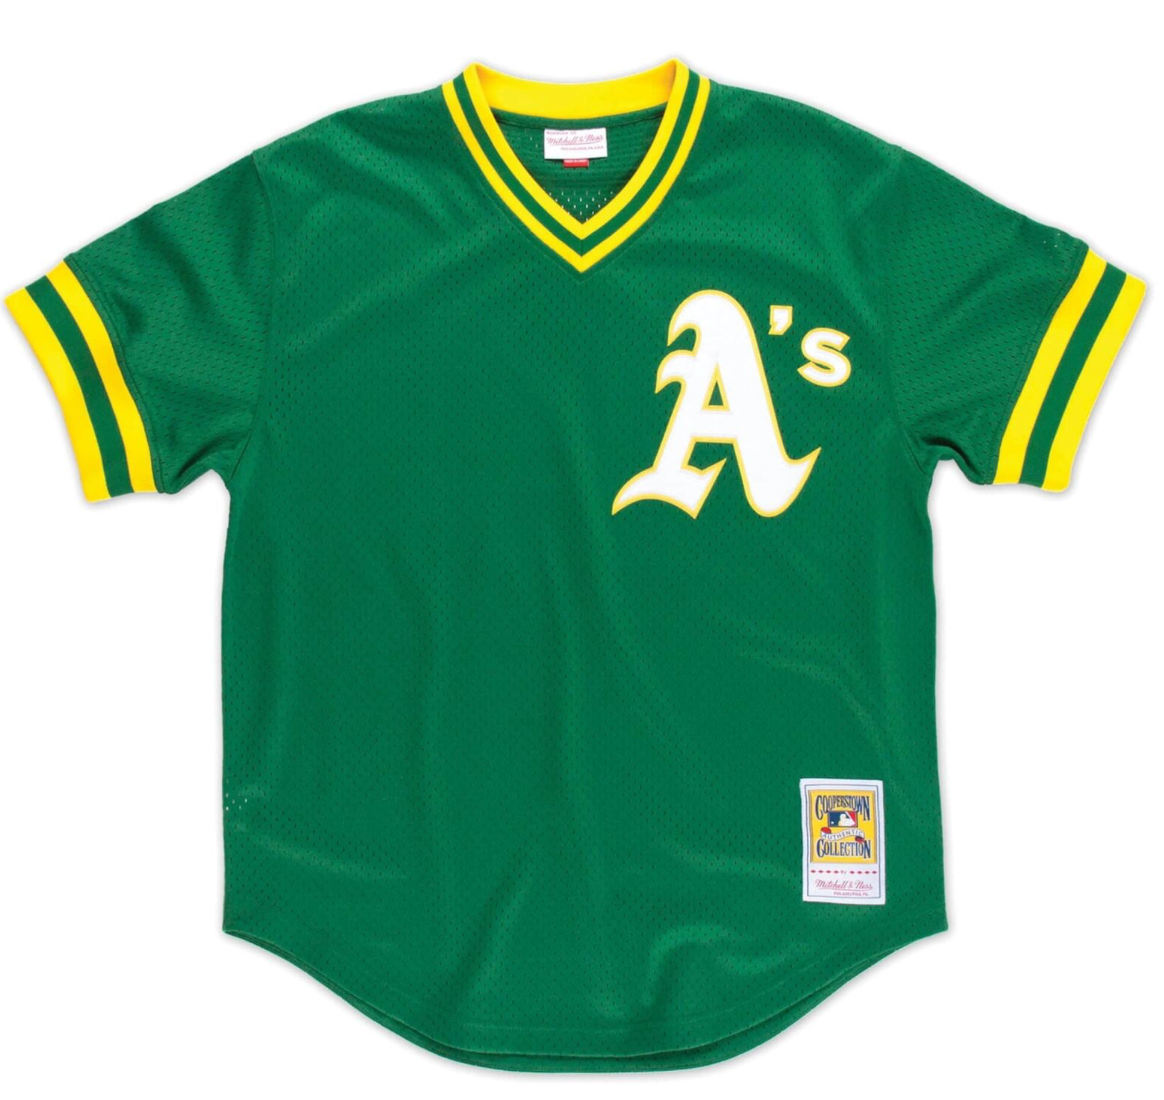 oakland a's jersey yellow